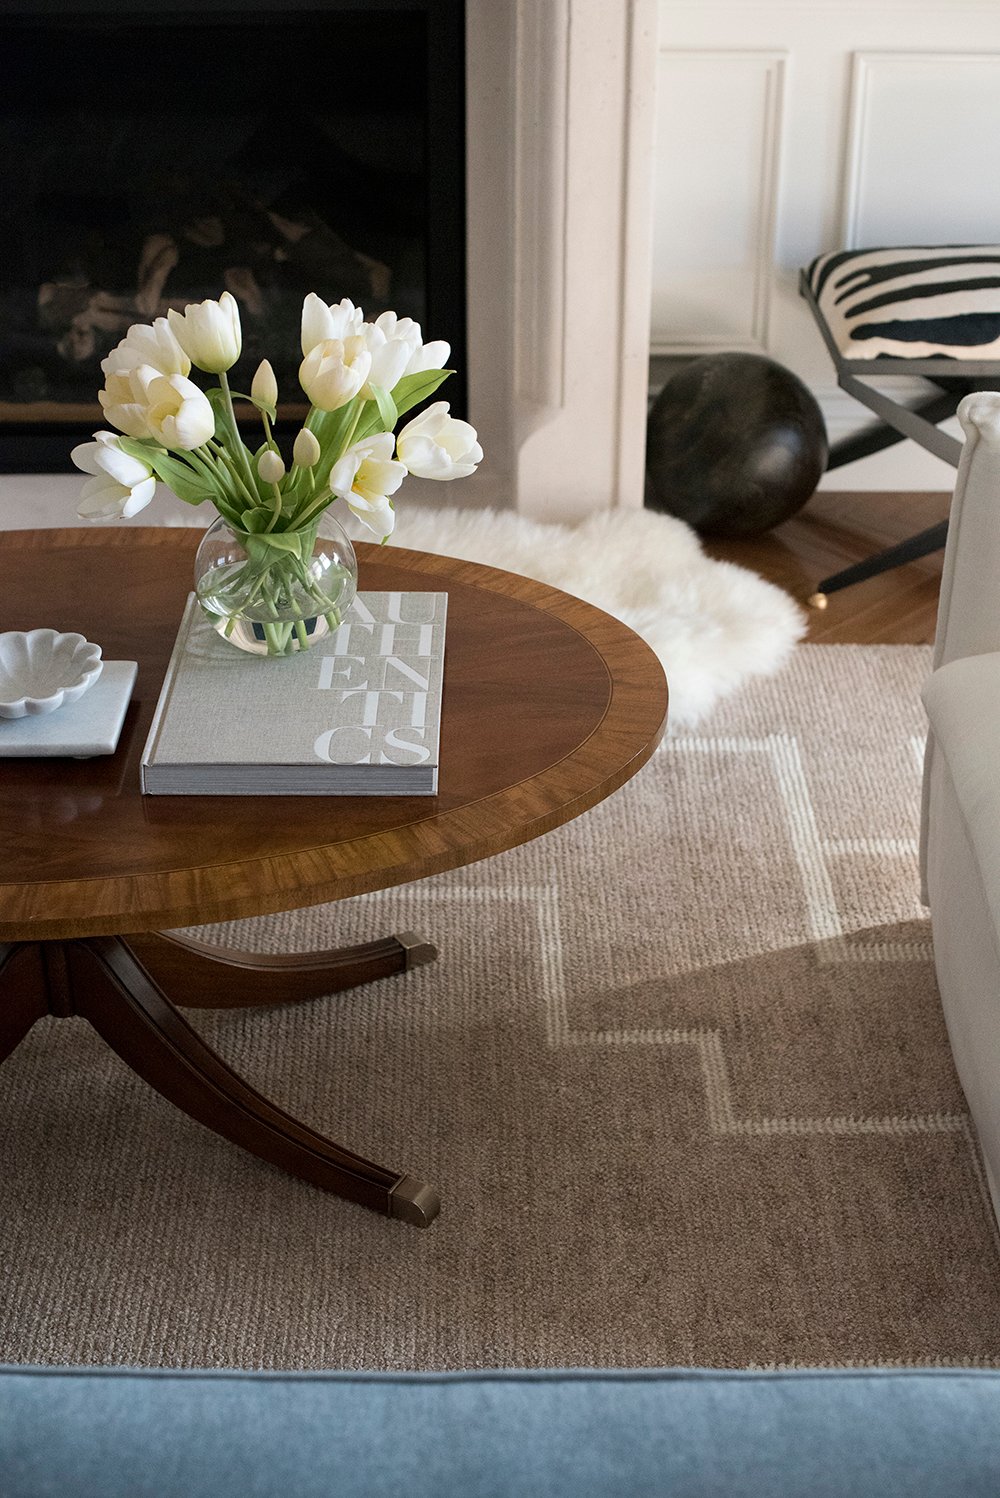 Designer Trick : Selecting the Right Rug - roomfortuesday.com